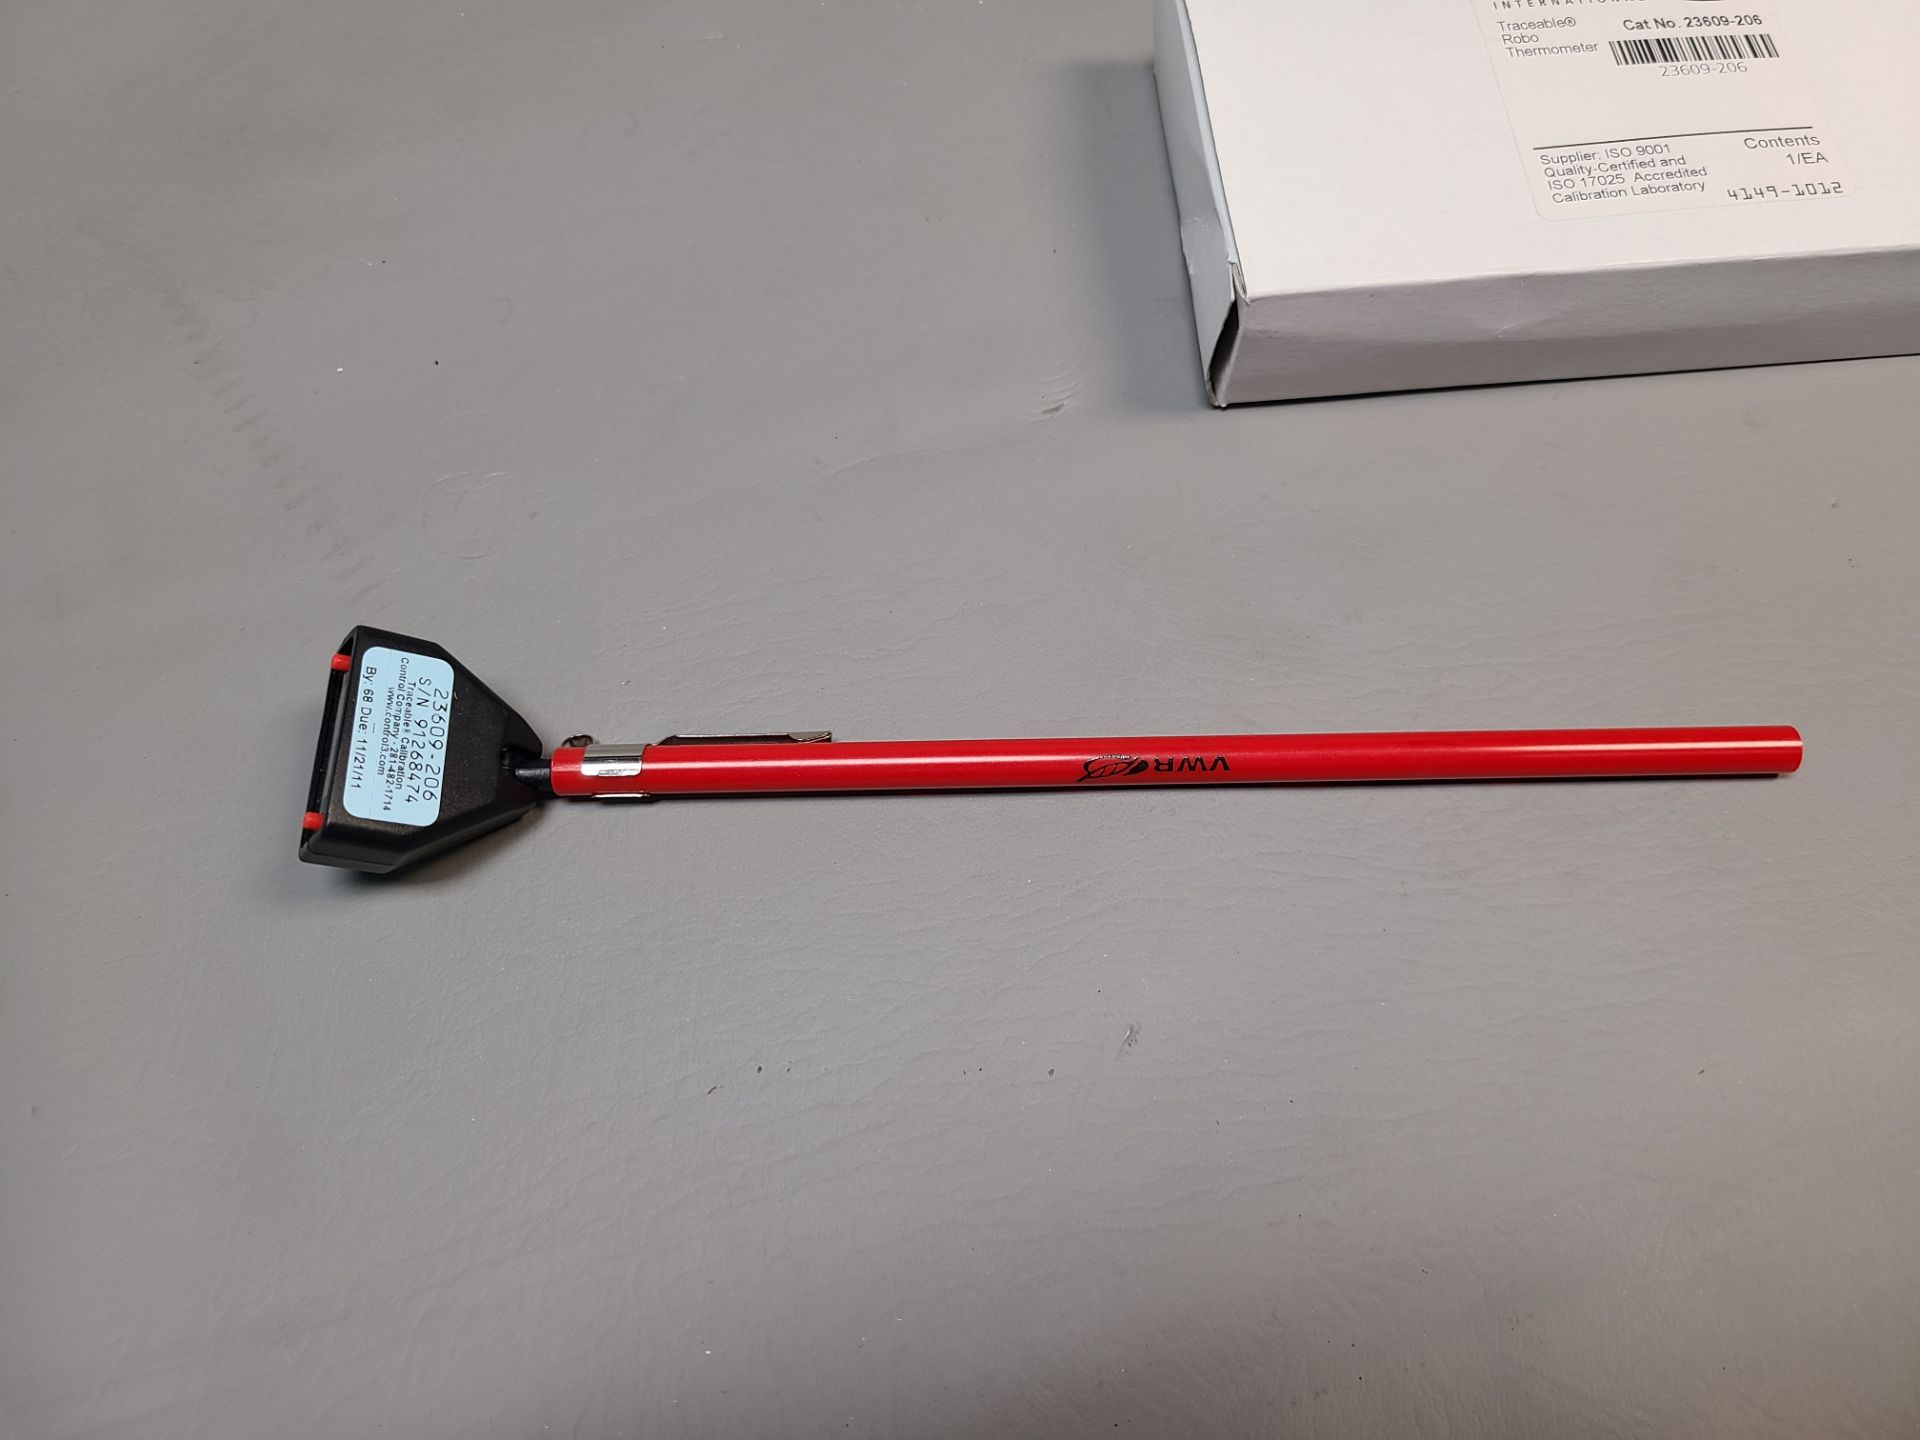 NEW VWR ROBO TRACEABLE DIGITAL THERMOMETER - Image 4 of 6